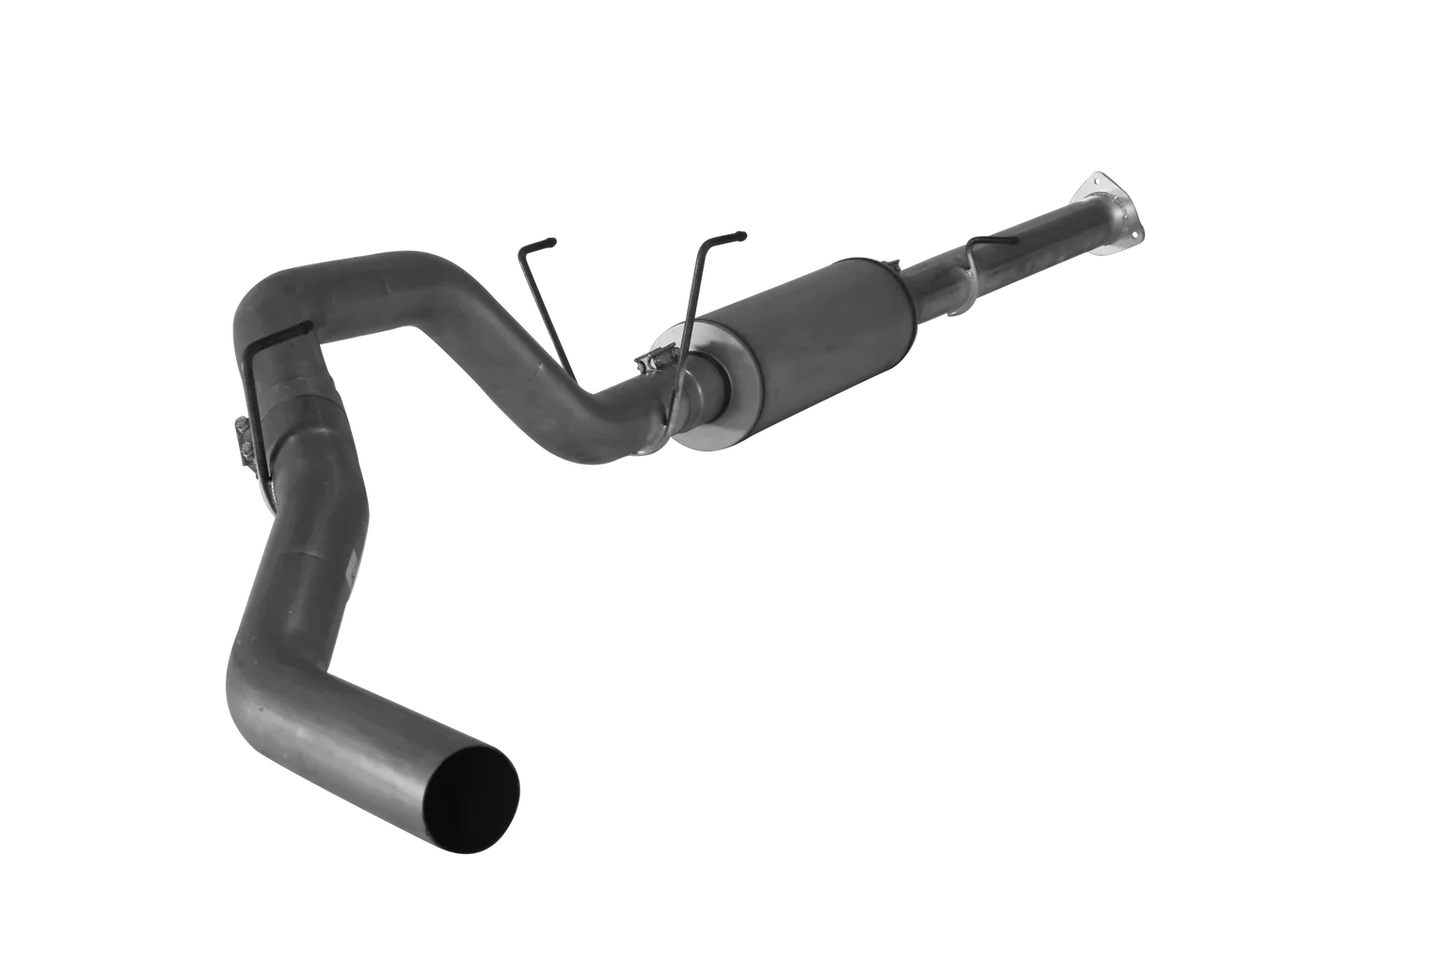 Downpipe Back Exhaust - Single (2013-2018 Dodge 2500/3500 6.7L Cummins) Exhaust DIESELR Tuning 4" With Muffler 